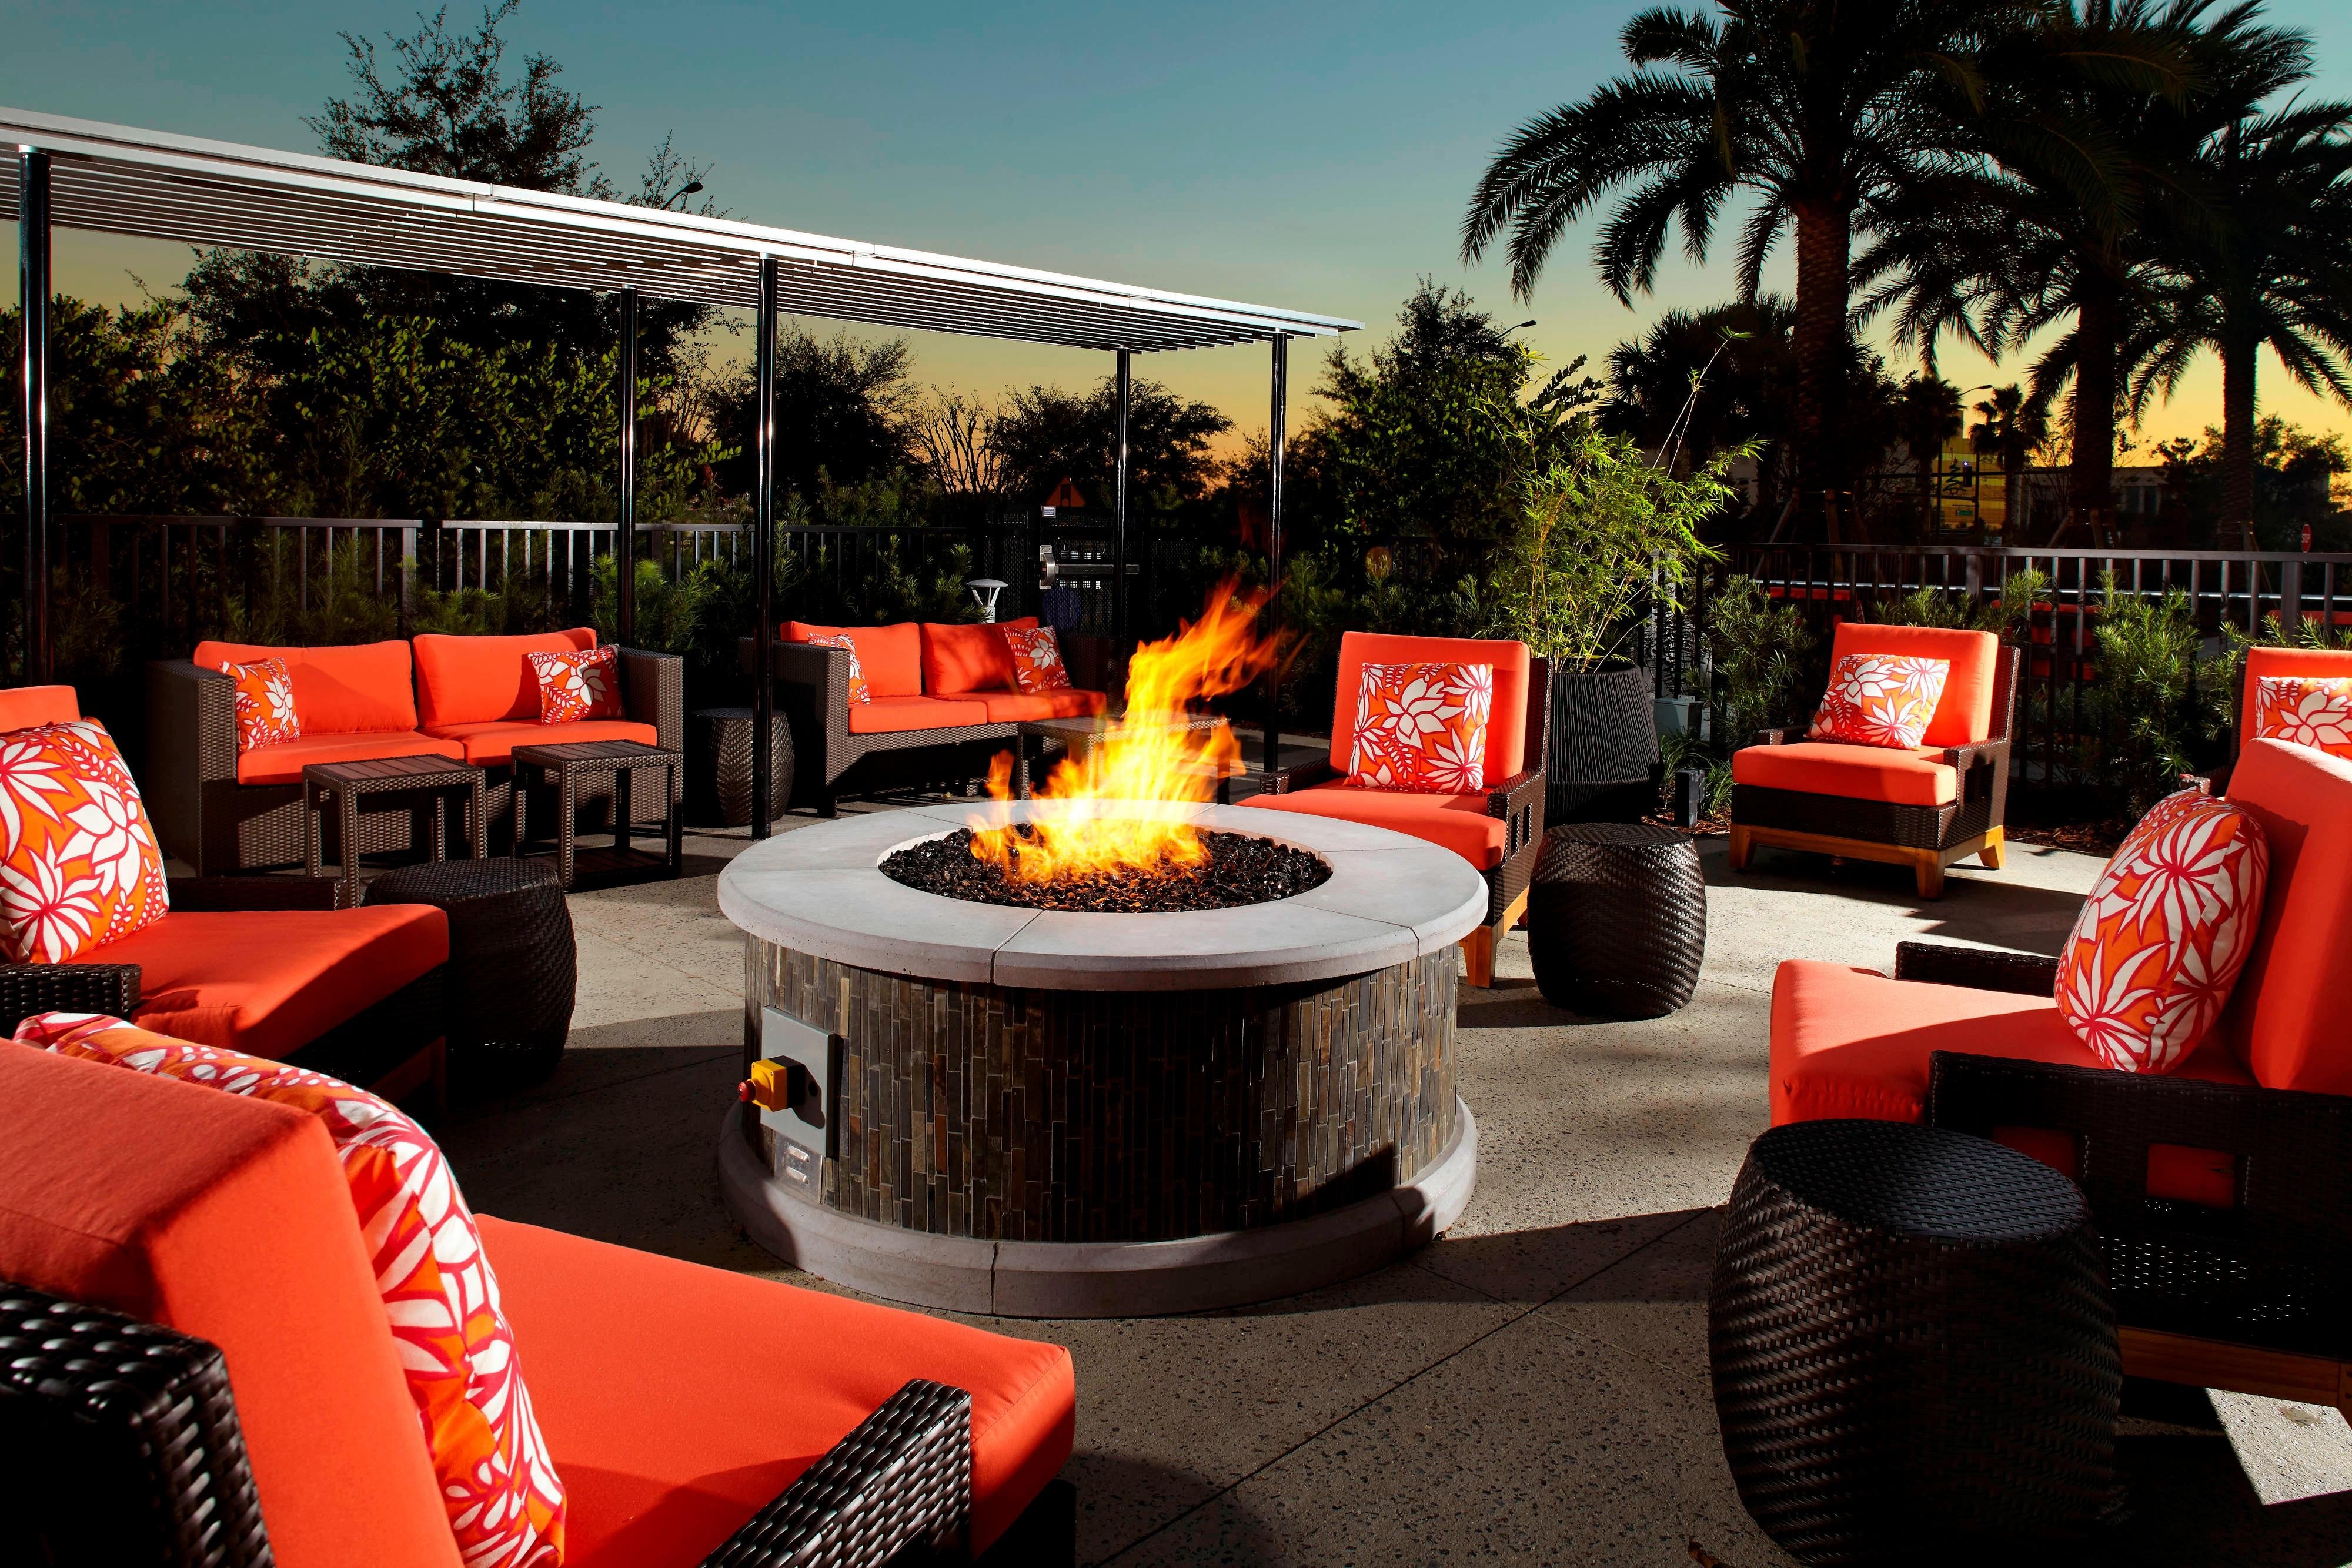 Hotel Patio and Fire Pit